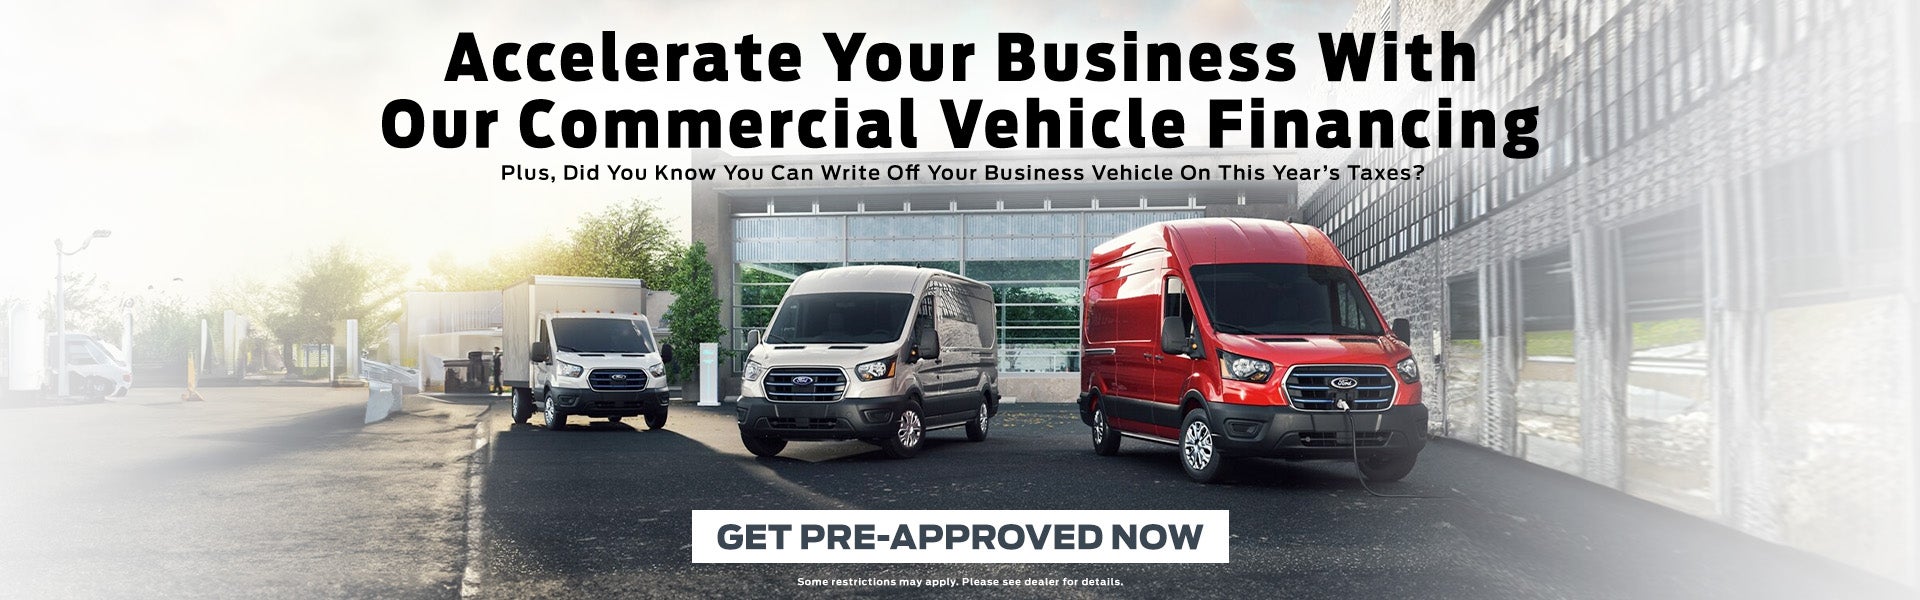 Commercial Vehicle Financing 